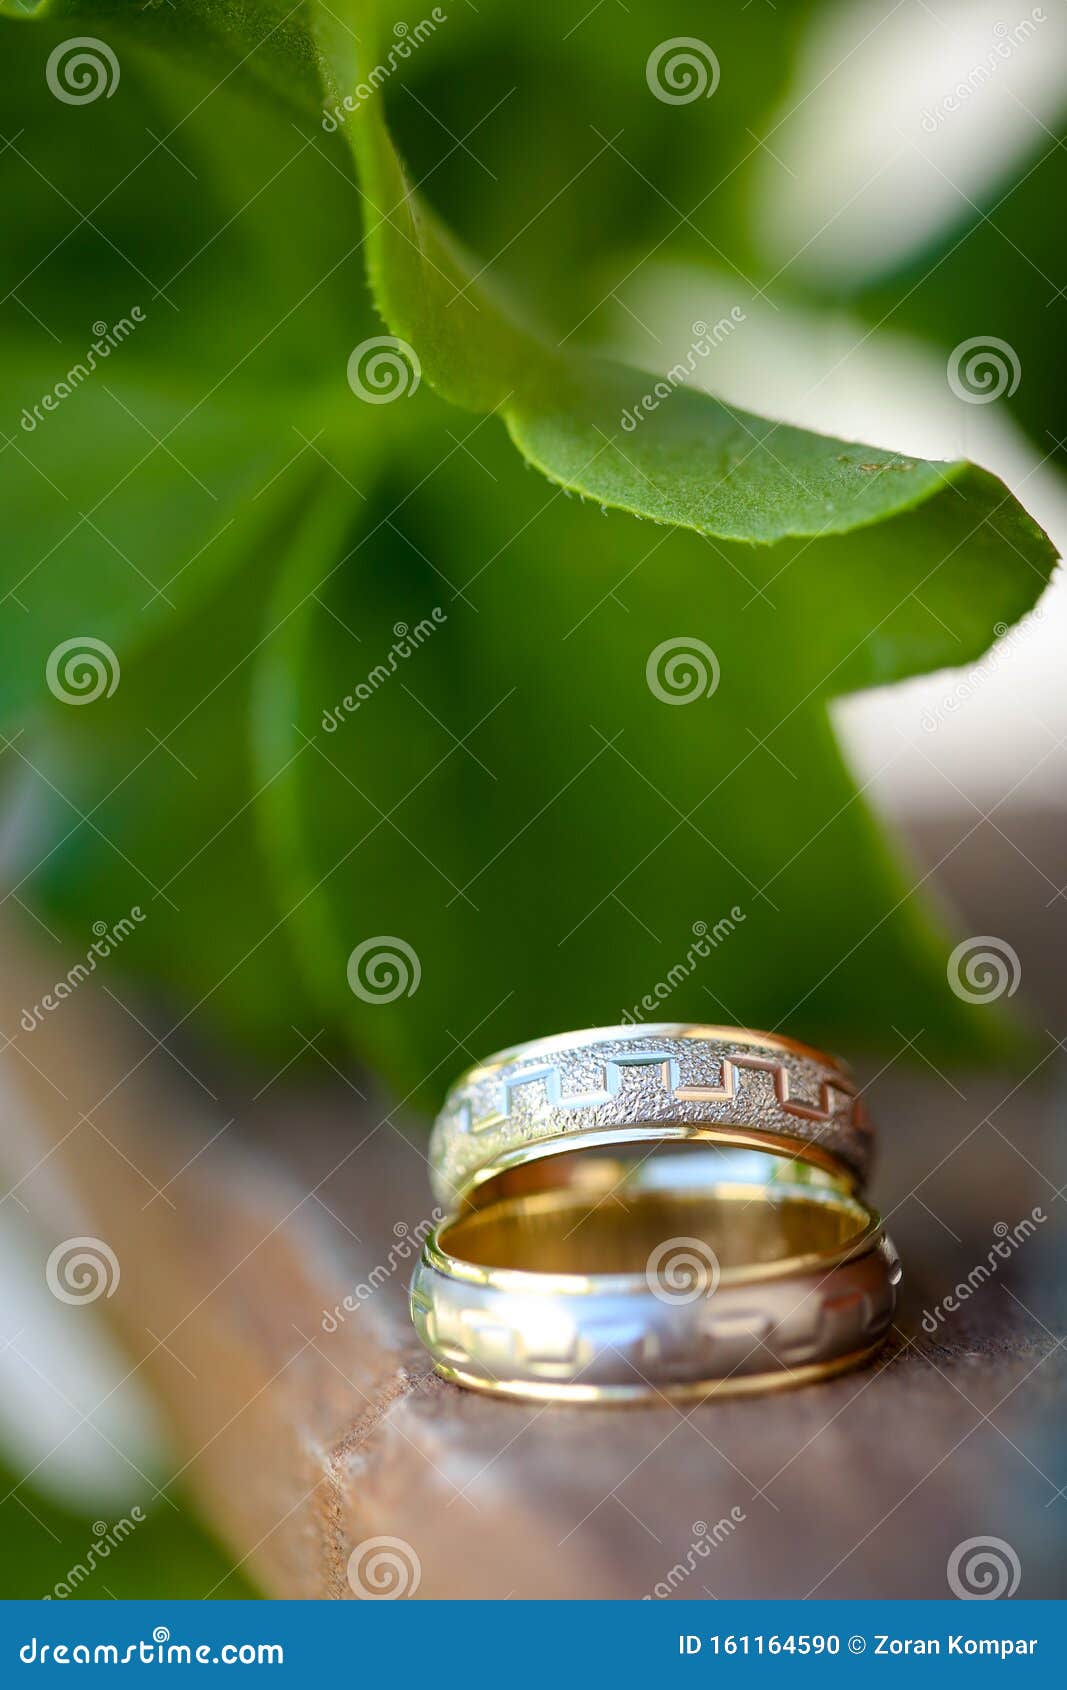 Close Up Of Two Wedding Rings On Wood With Green Leaf In